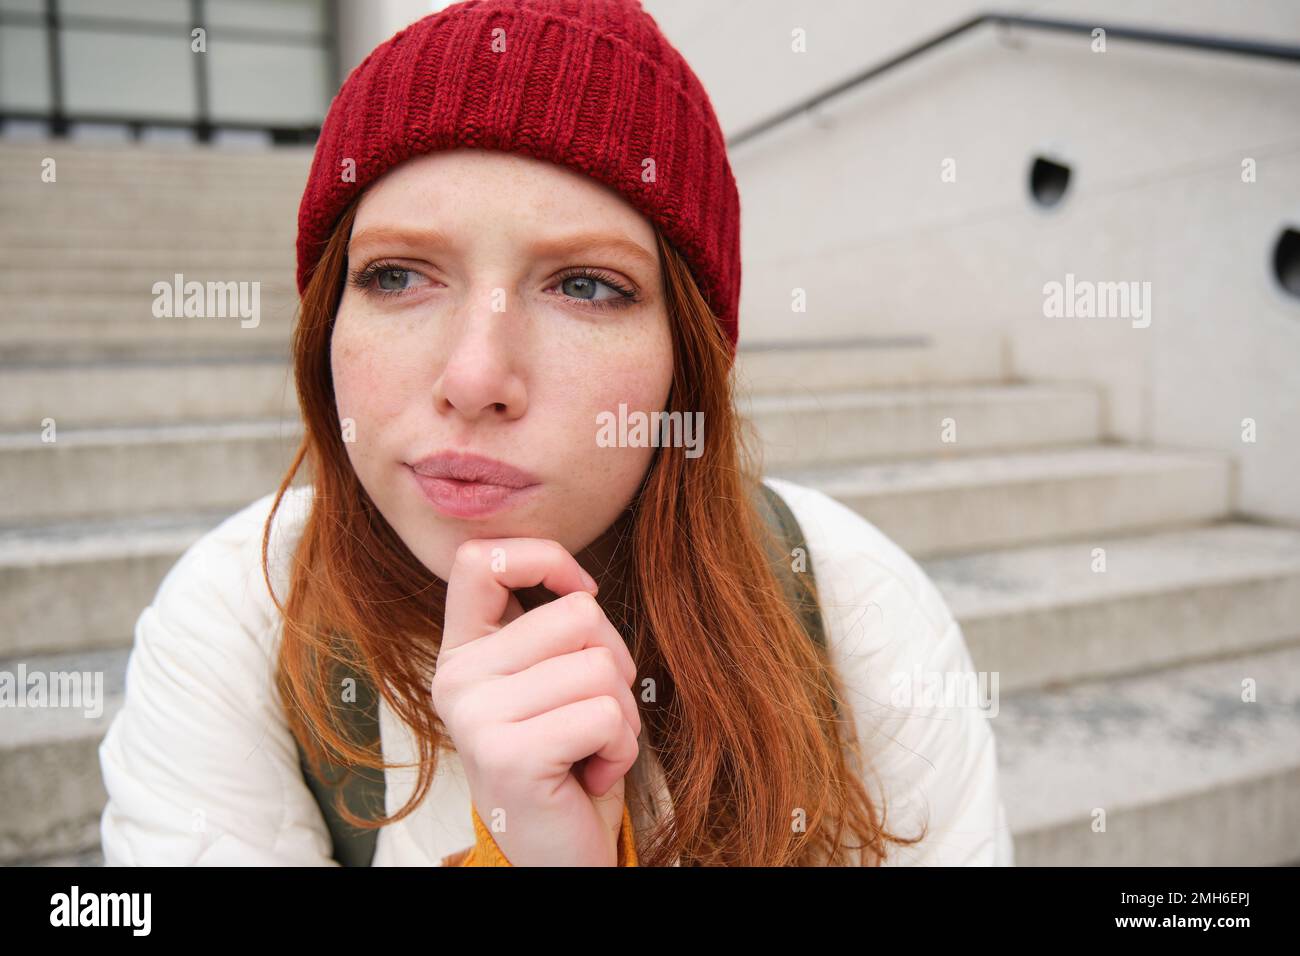 Portrait of redhead girl in red hat, looks thoughtful, touches her chin, frowns and thinks with complicated face expression, sits on stairs outdoors Stock Photo